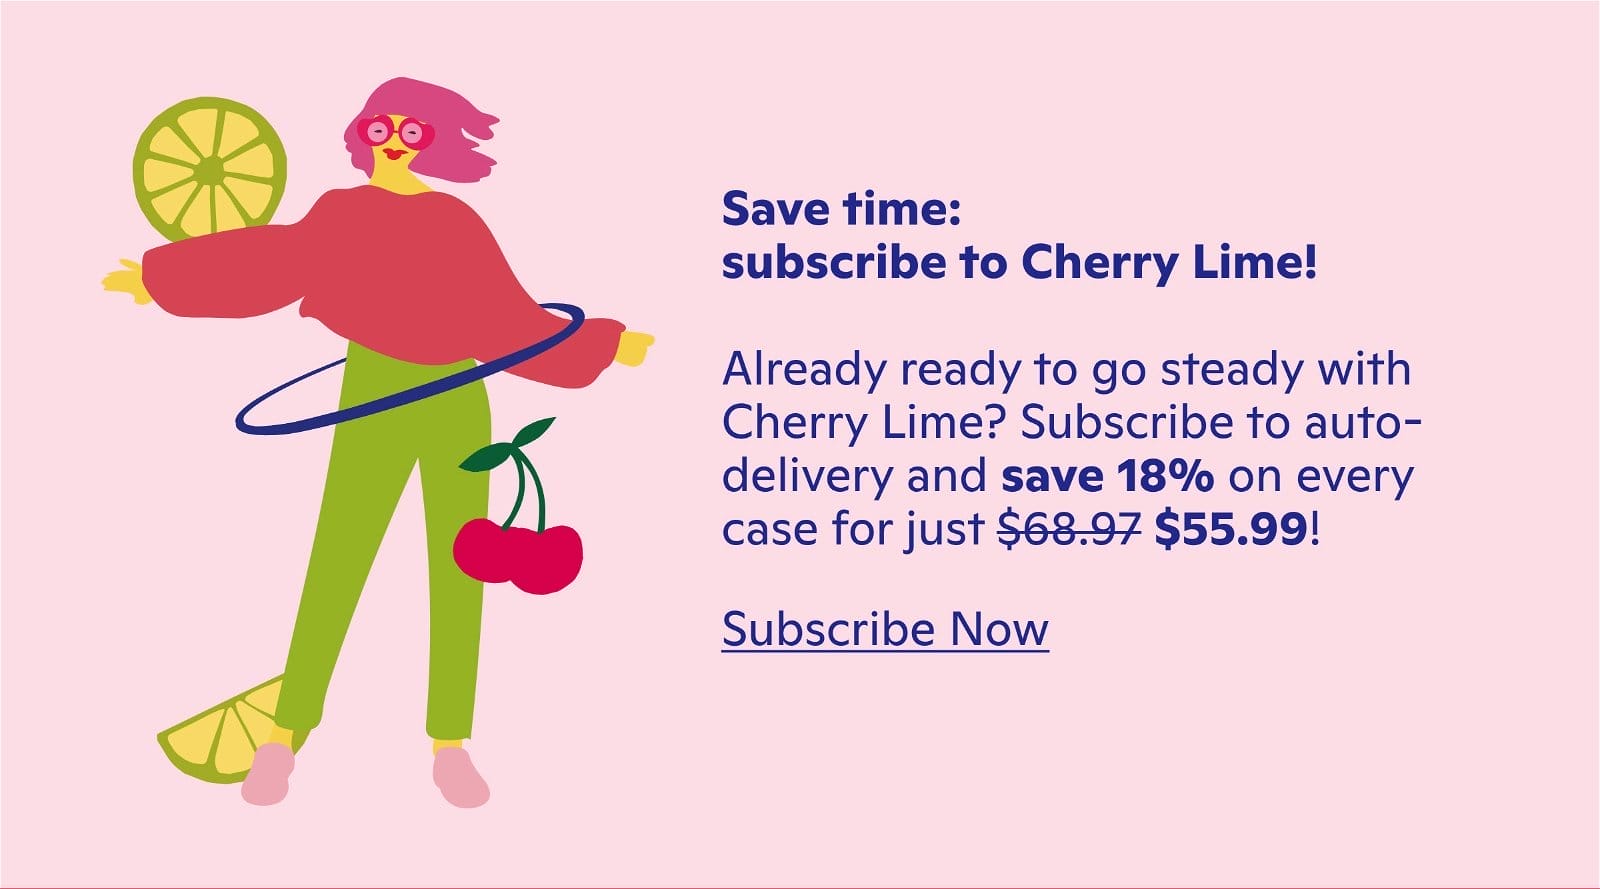 Save time: subscribe to Cherry Lime!